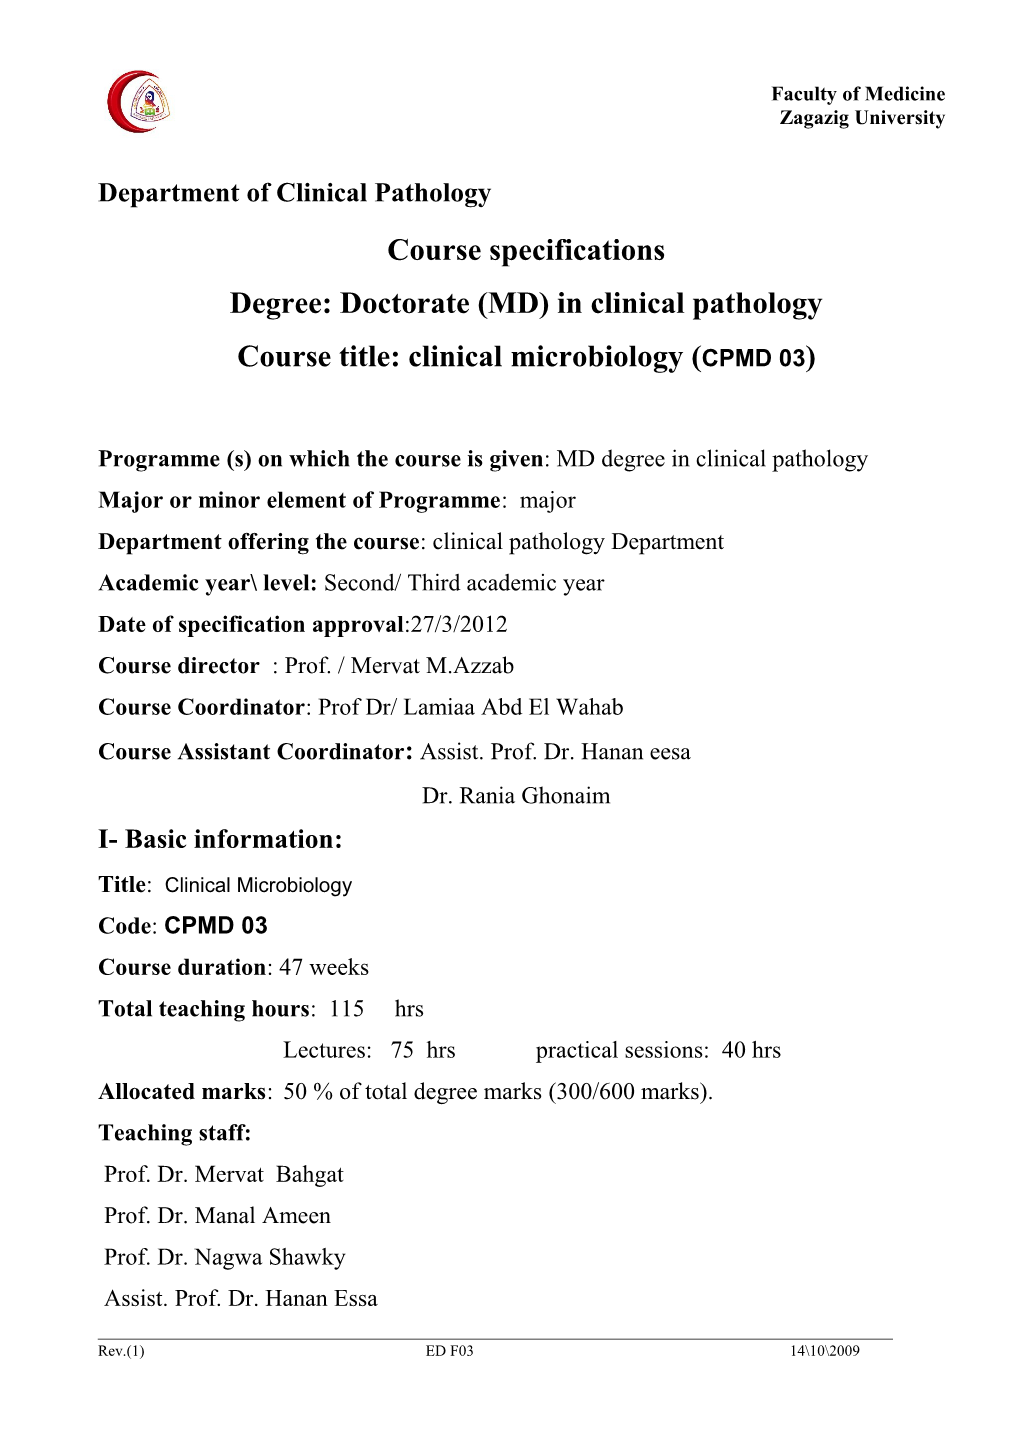 Degree: Doctorate (MD) in Clinical Pathology